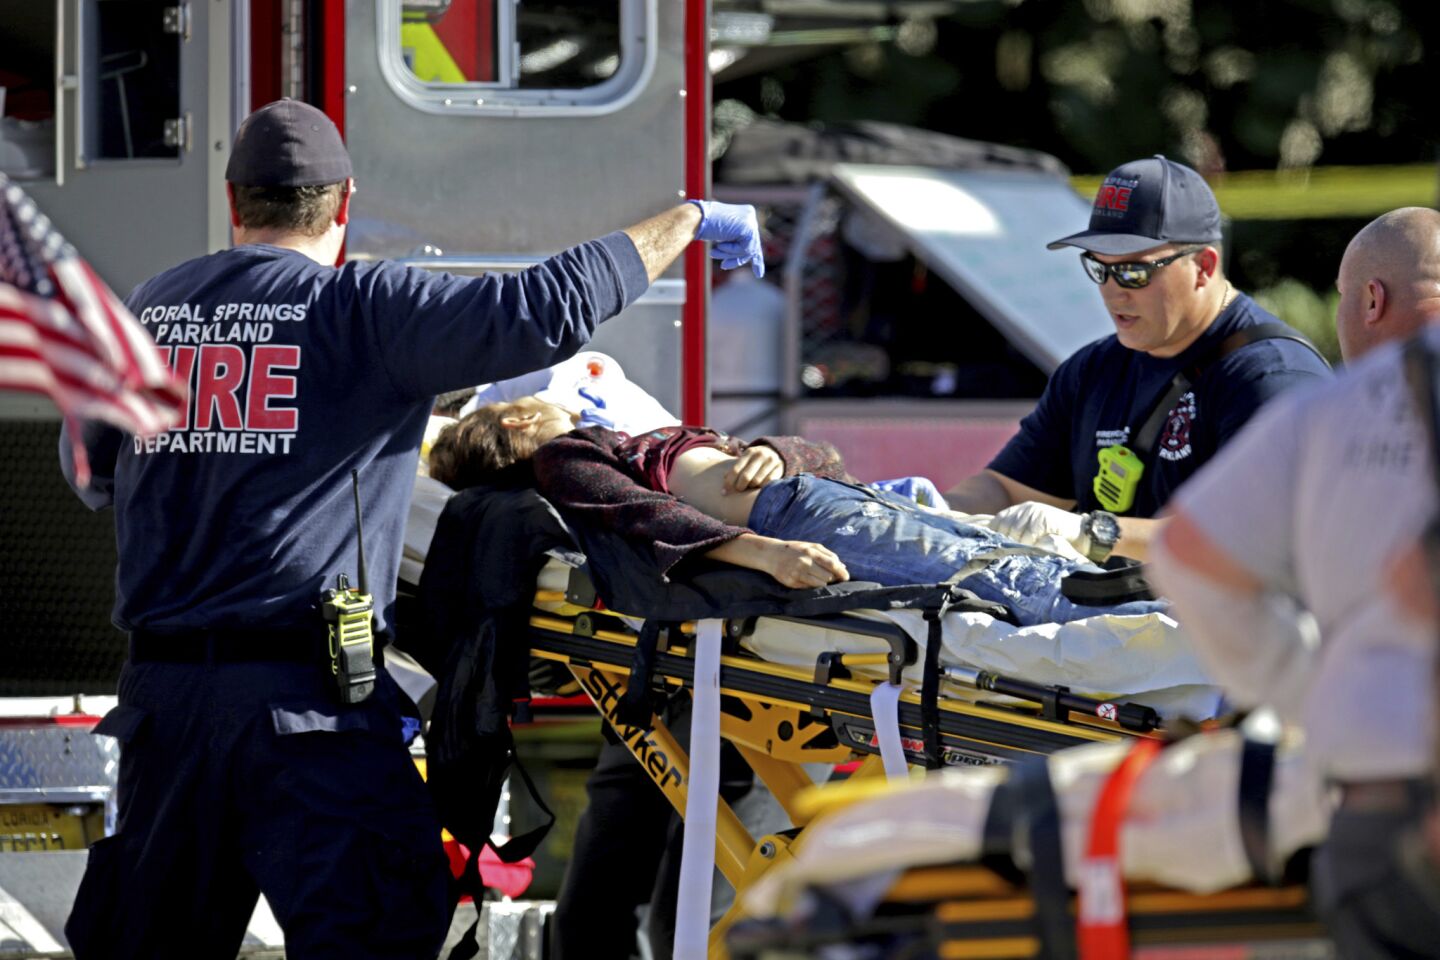 Medical personnel tend to a victim after the mass shooting.